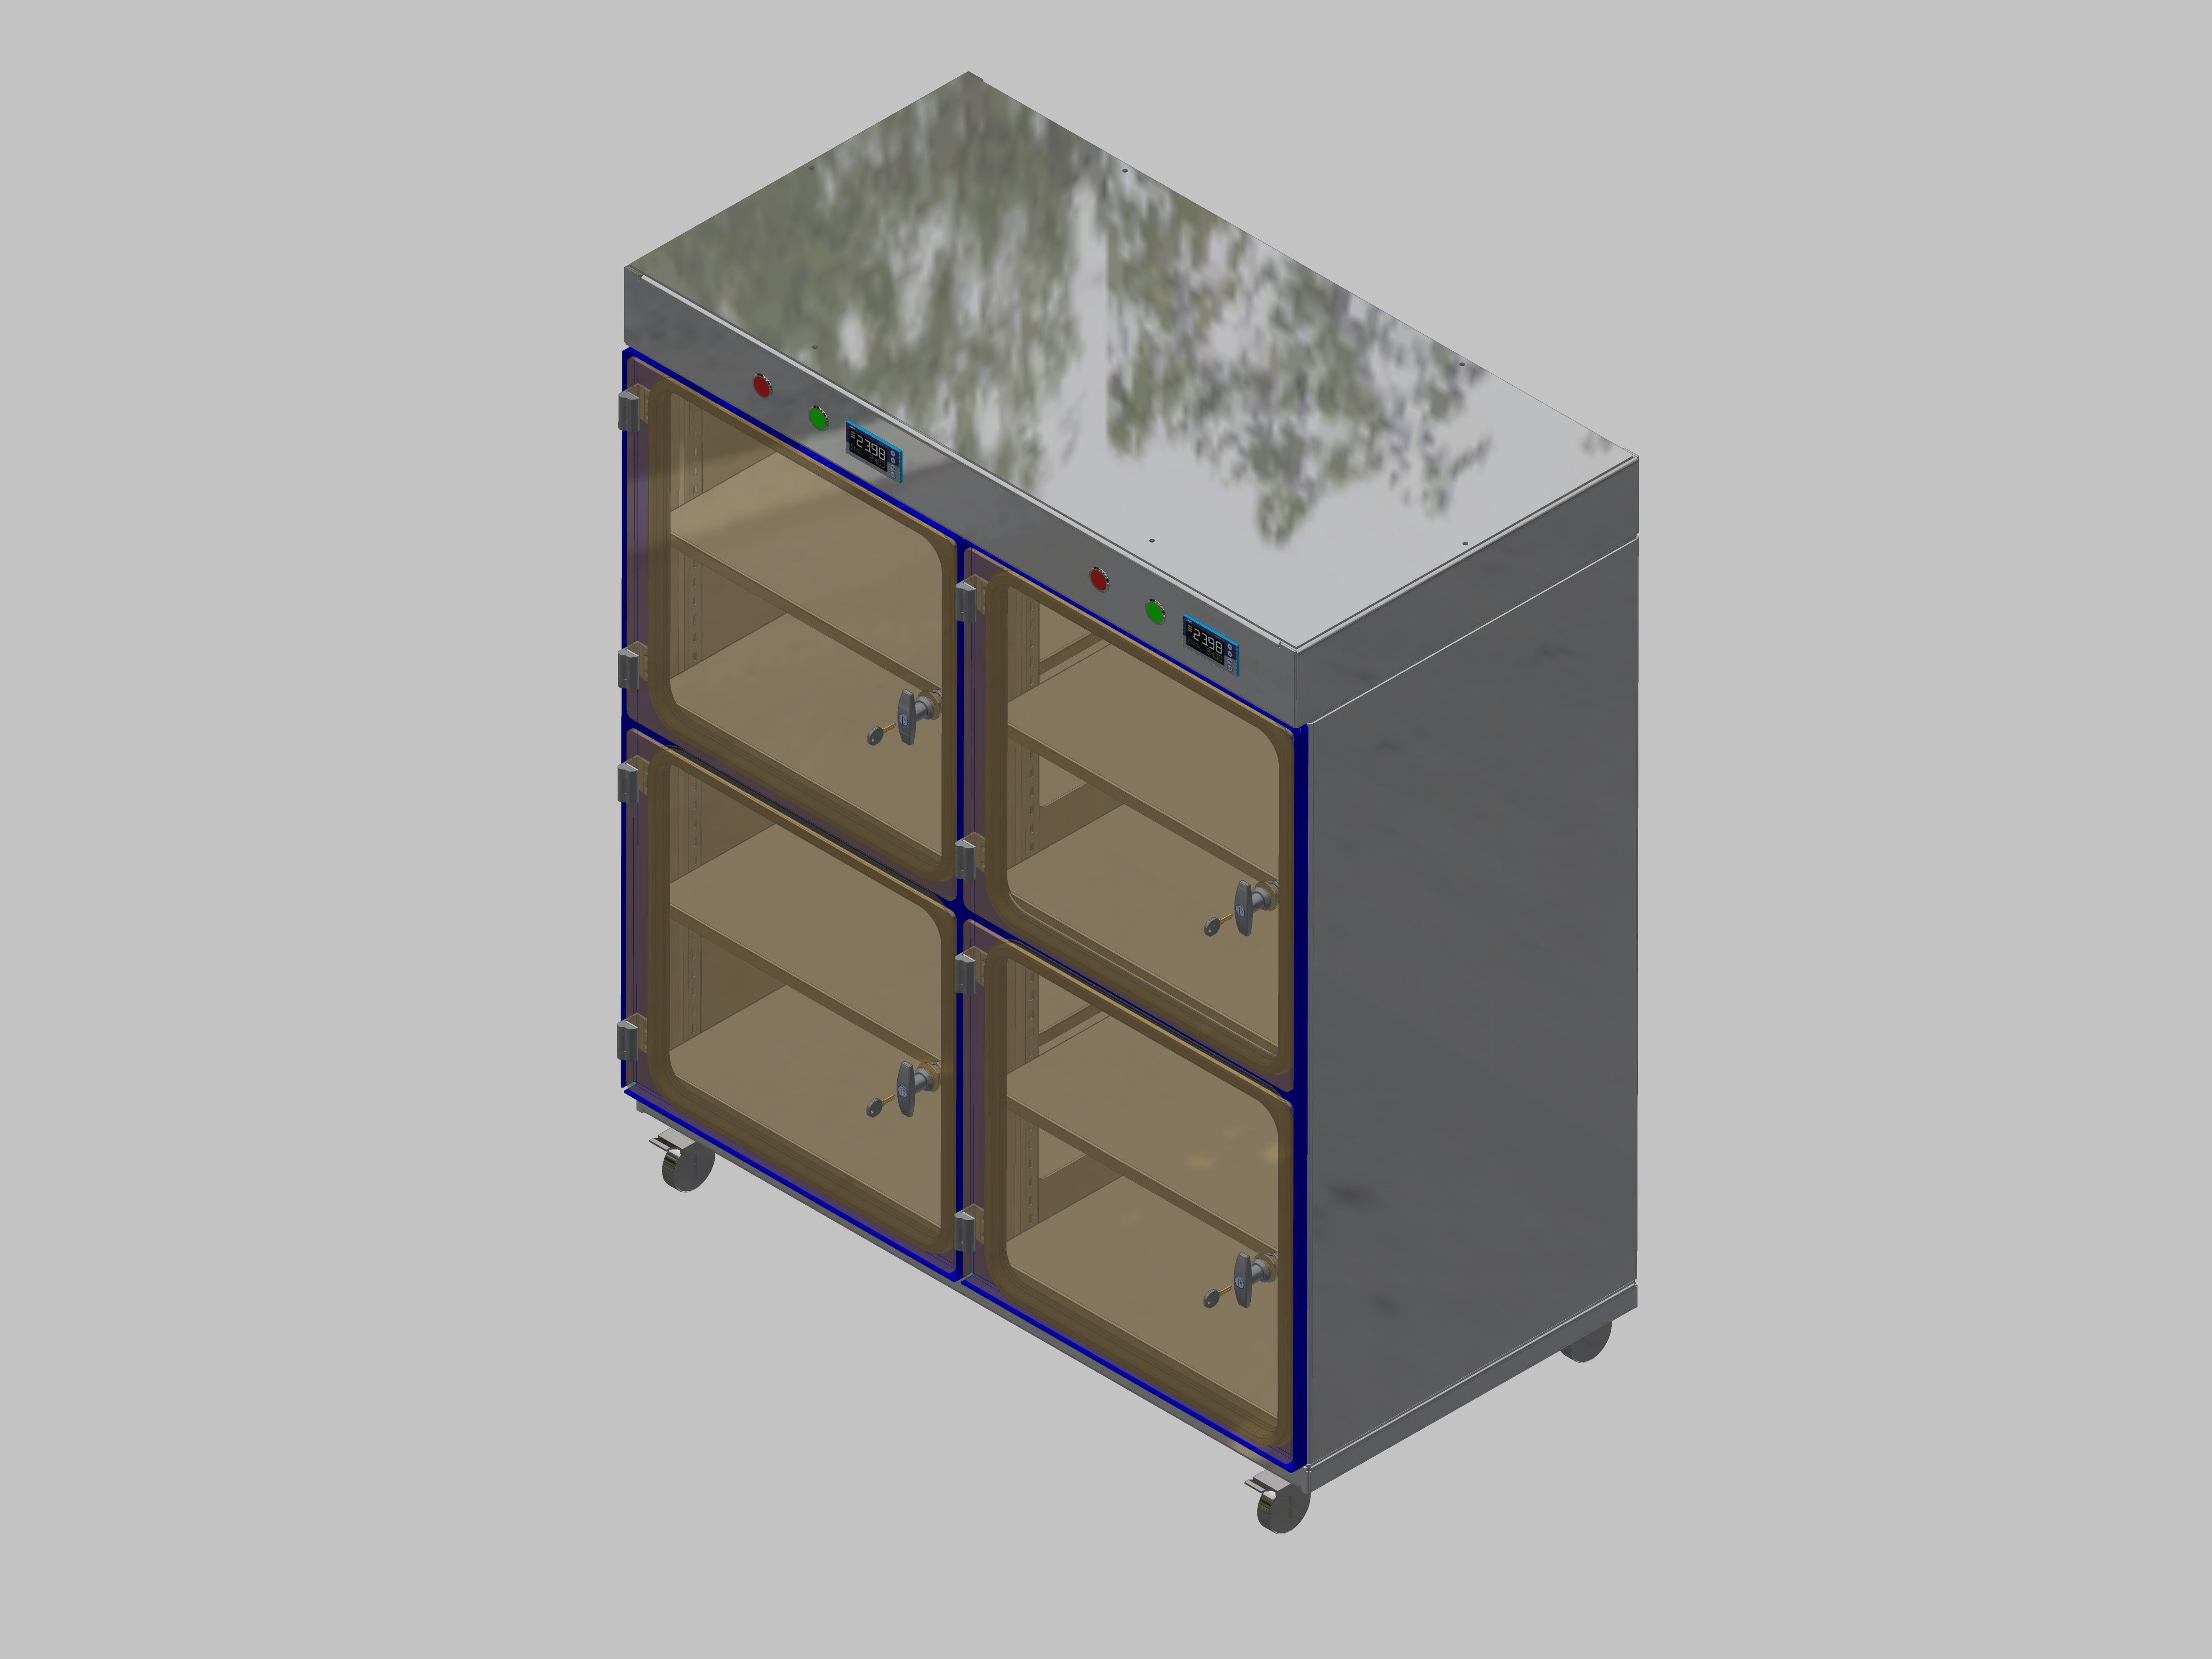 Dry storage cabinet-ITN-1200-4 with 2 shelves per compartment and base design with wheels